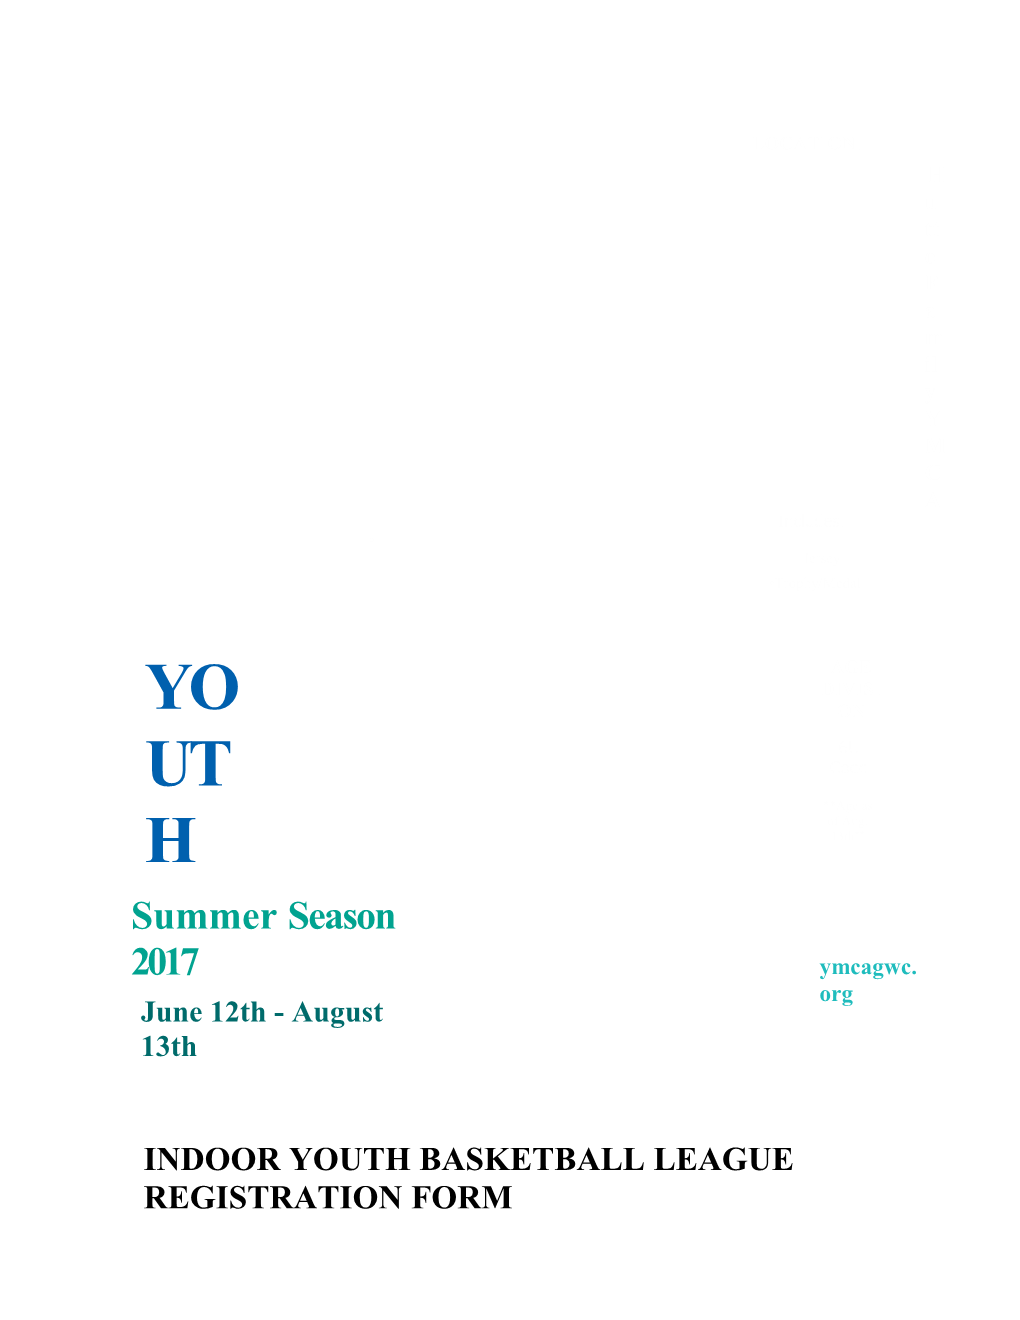 Indoor Youth Basketball League Registration Form